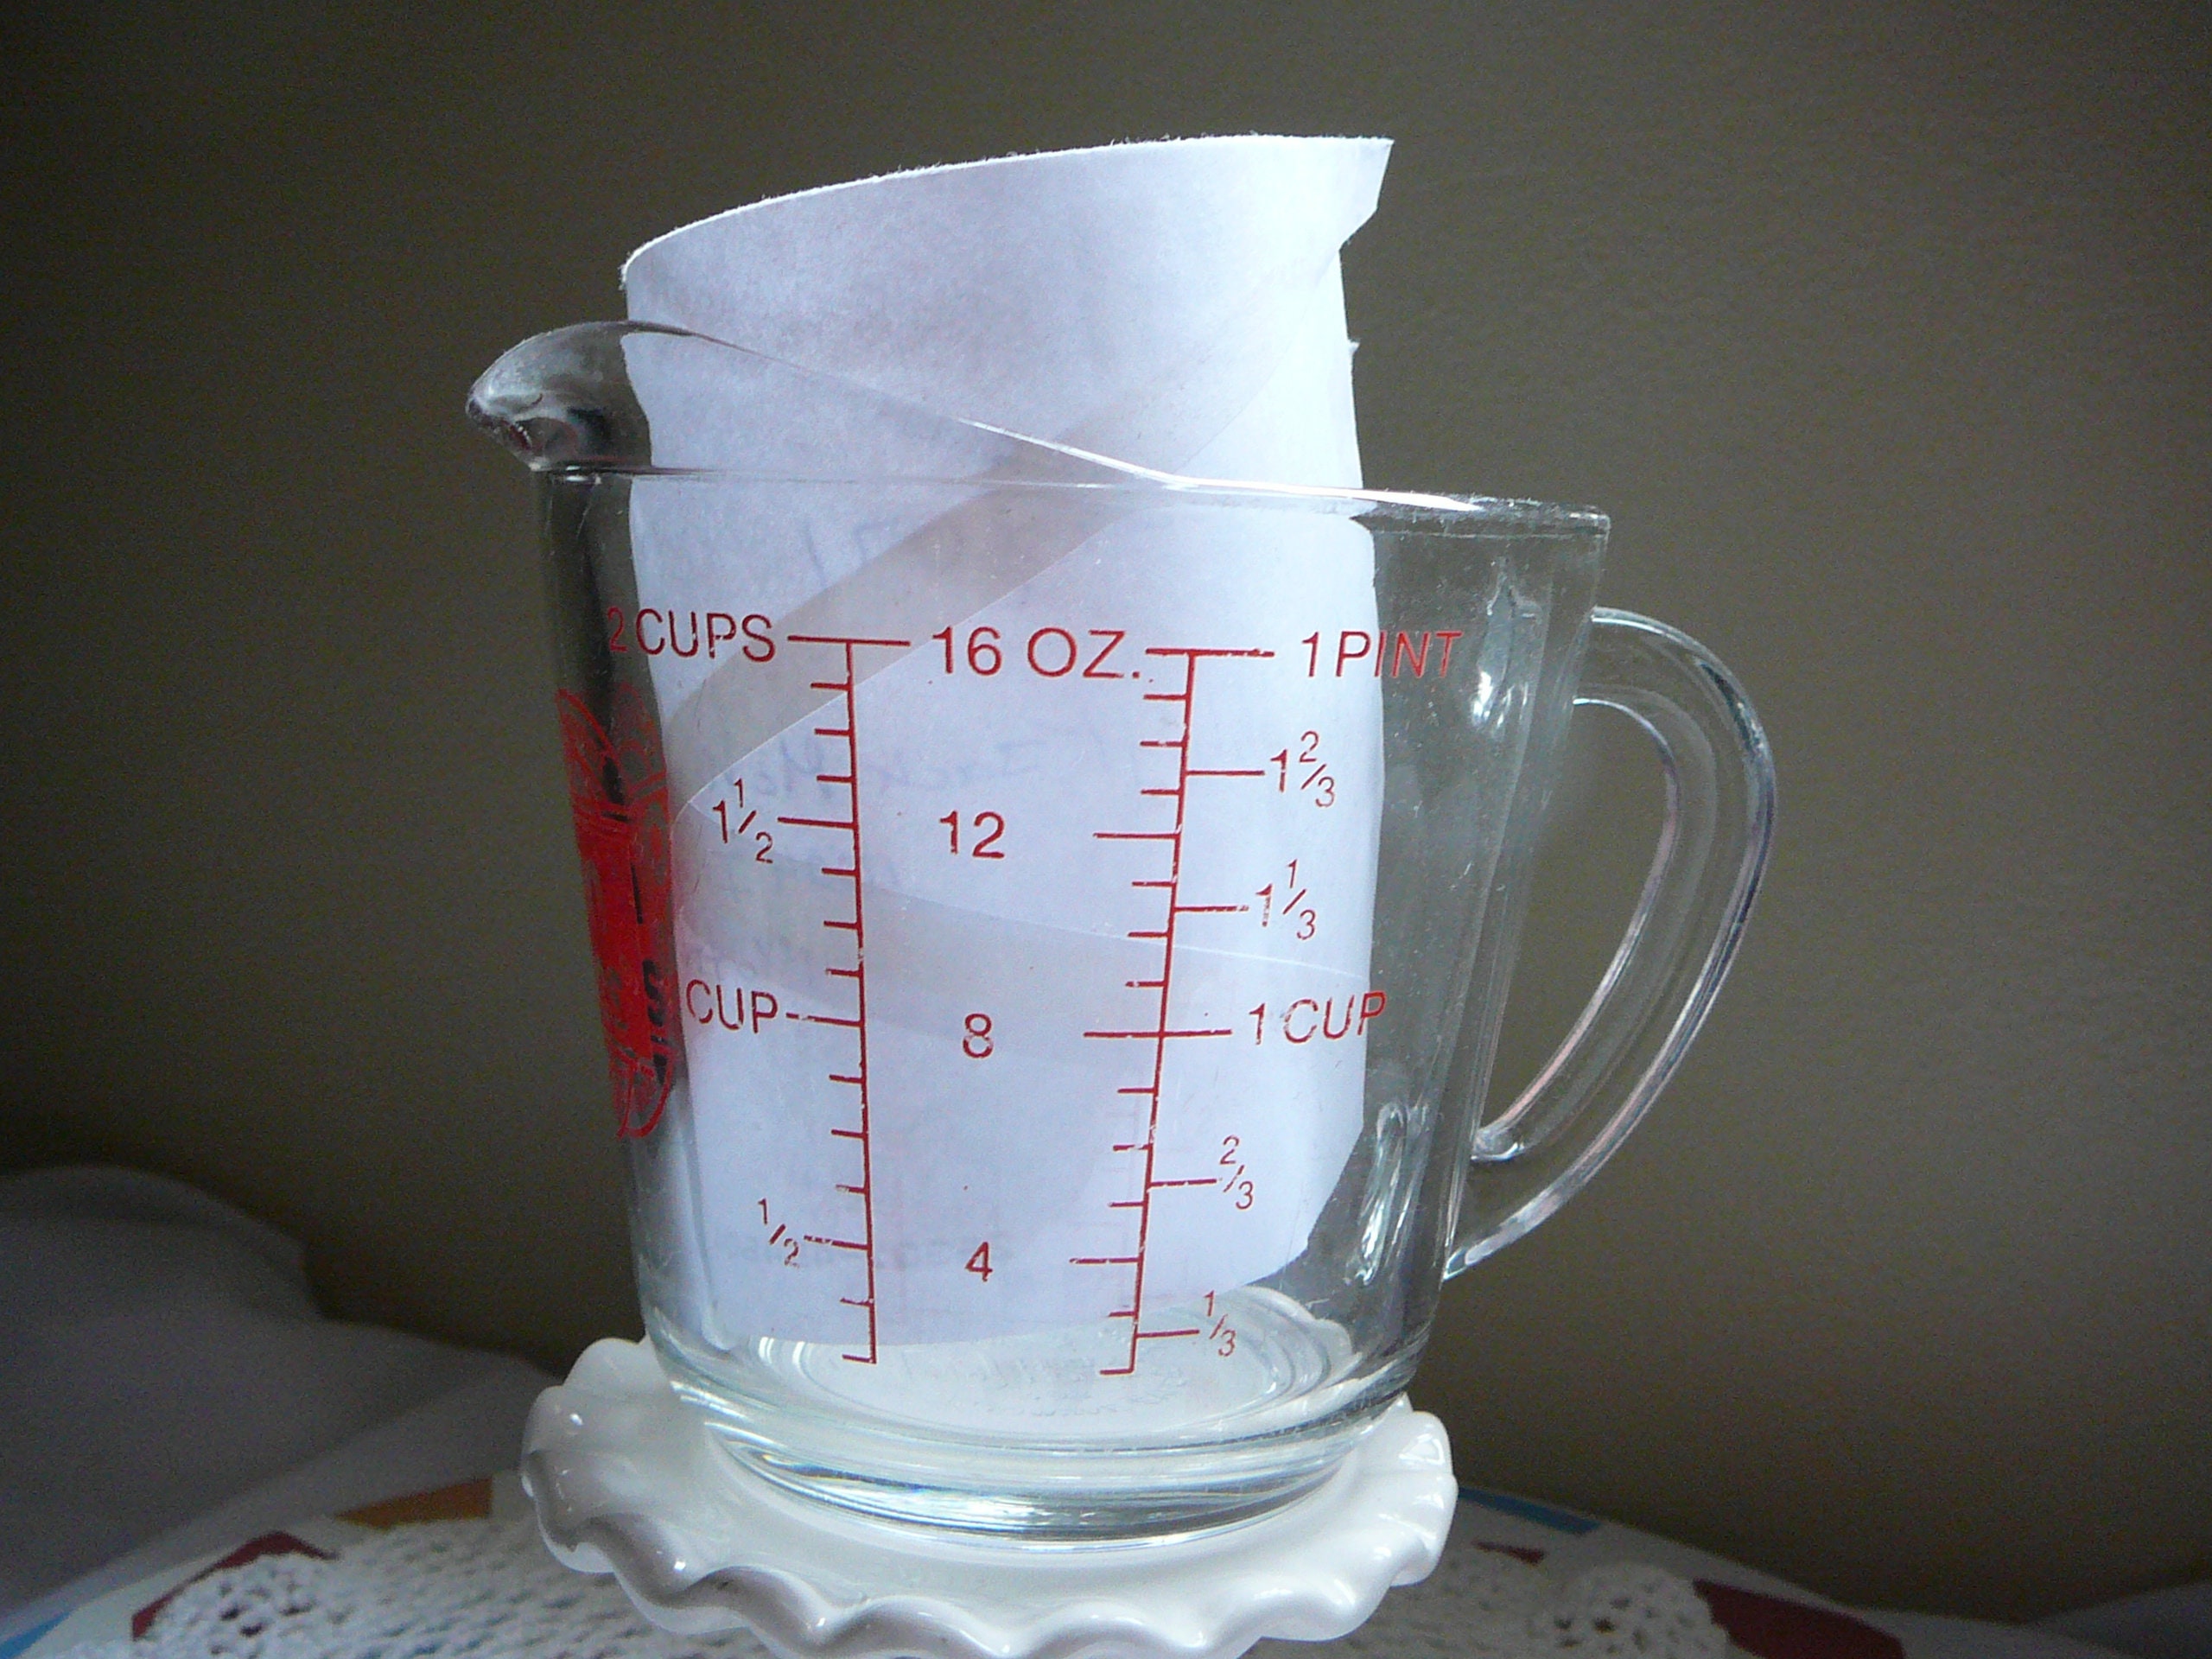 16 oz Glass Measuring Cup - Anchor - Jar Store